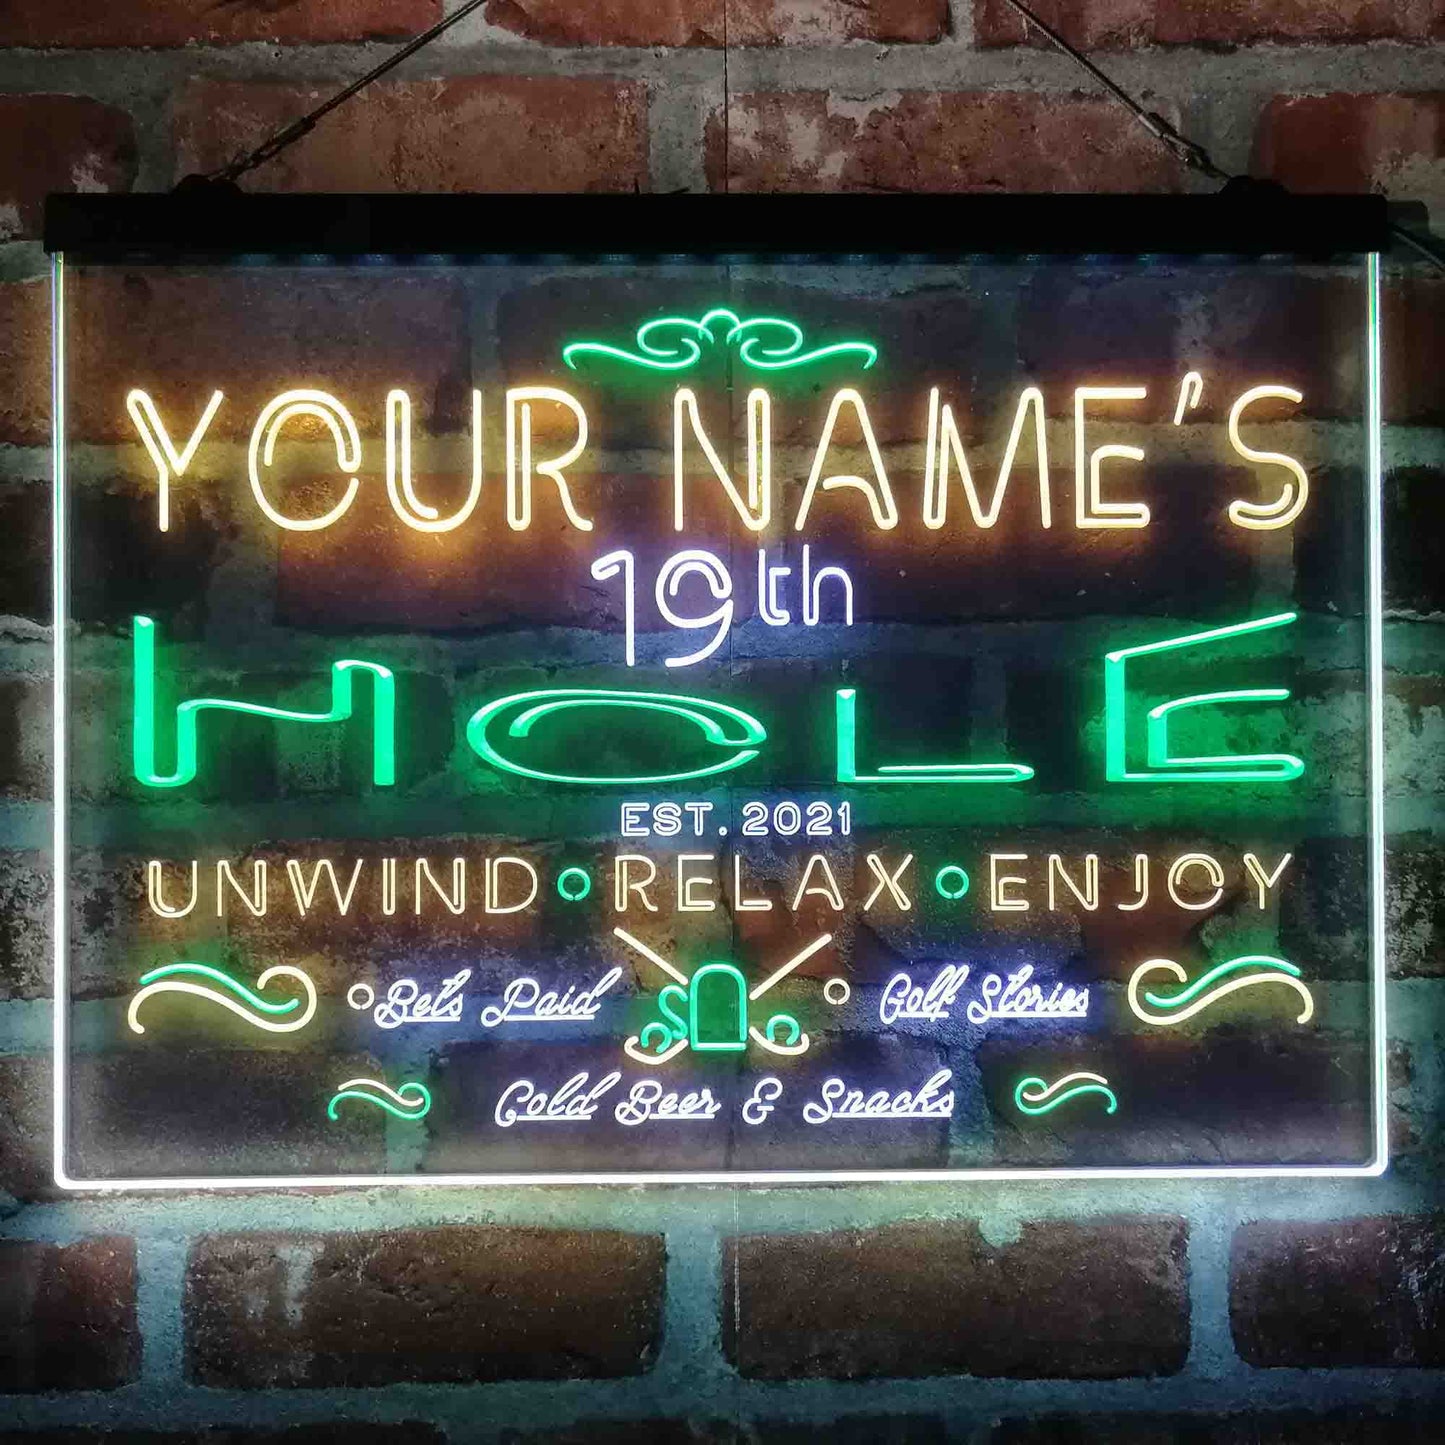 Personalized 19th Hole Golf Club 3-Color LED Neon Light Sign - Way Up Gifts